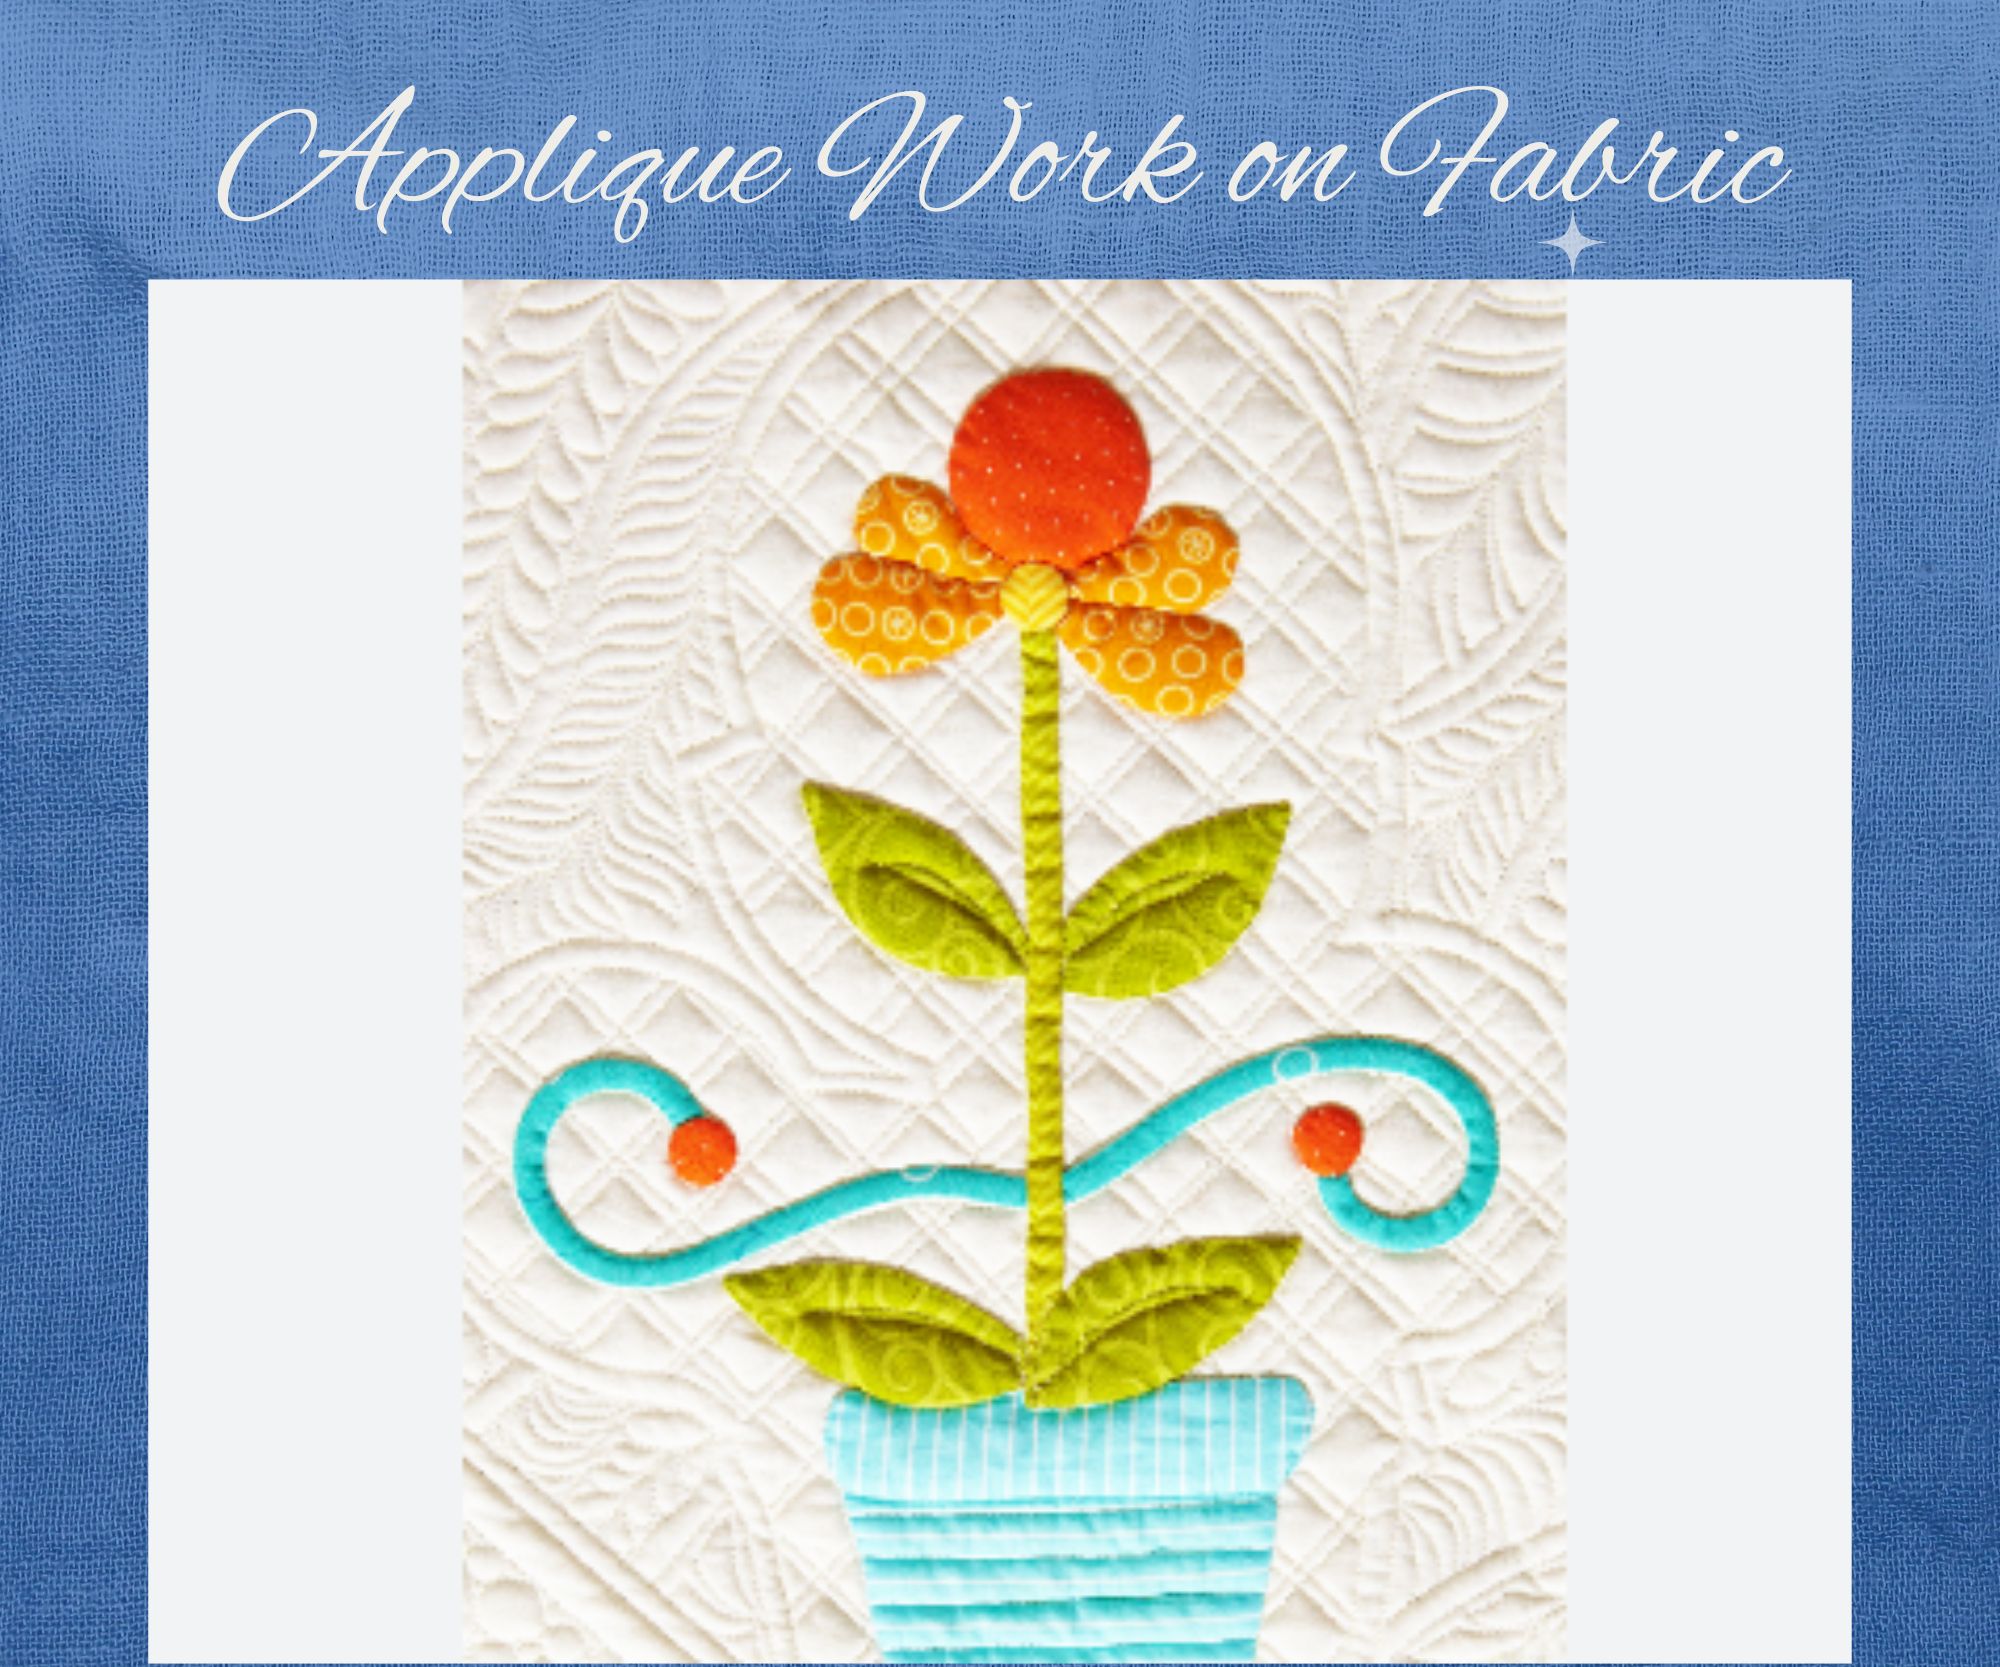 Introduction Of Applique Work on Fabric